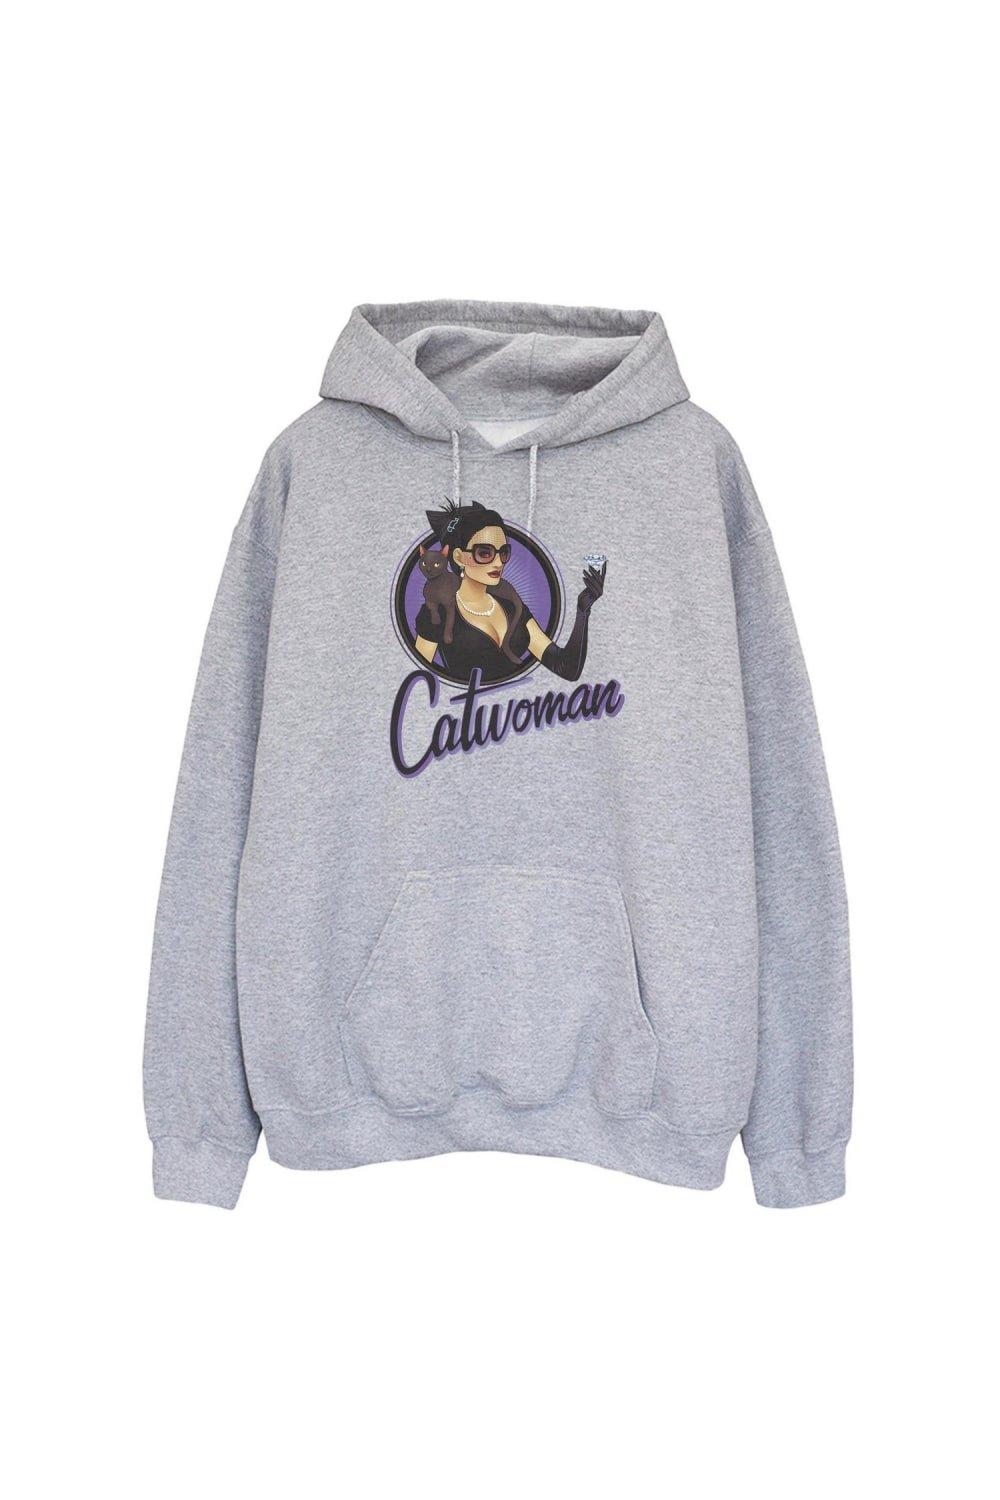 catwoman hoodie